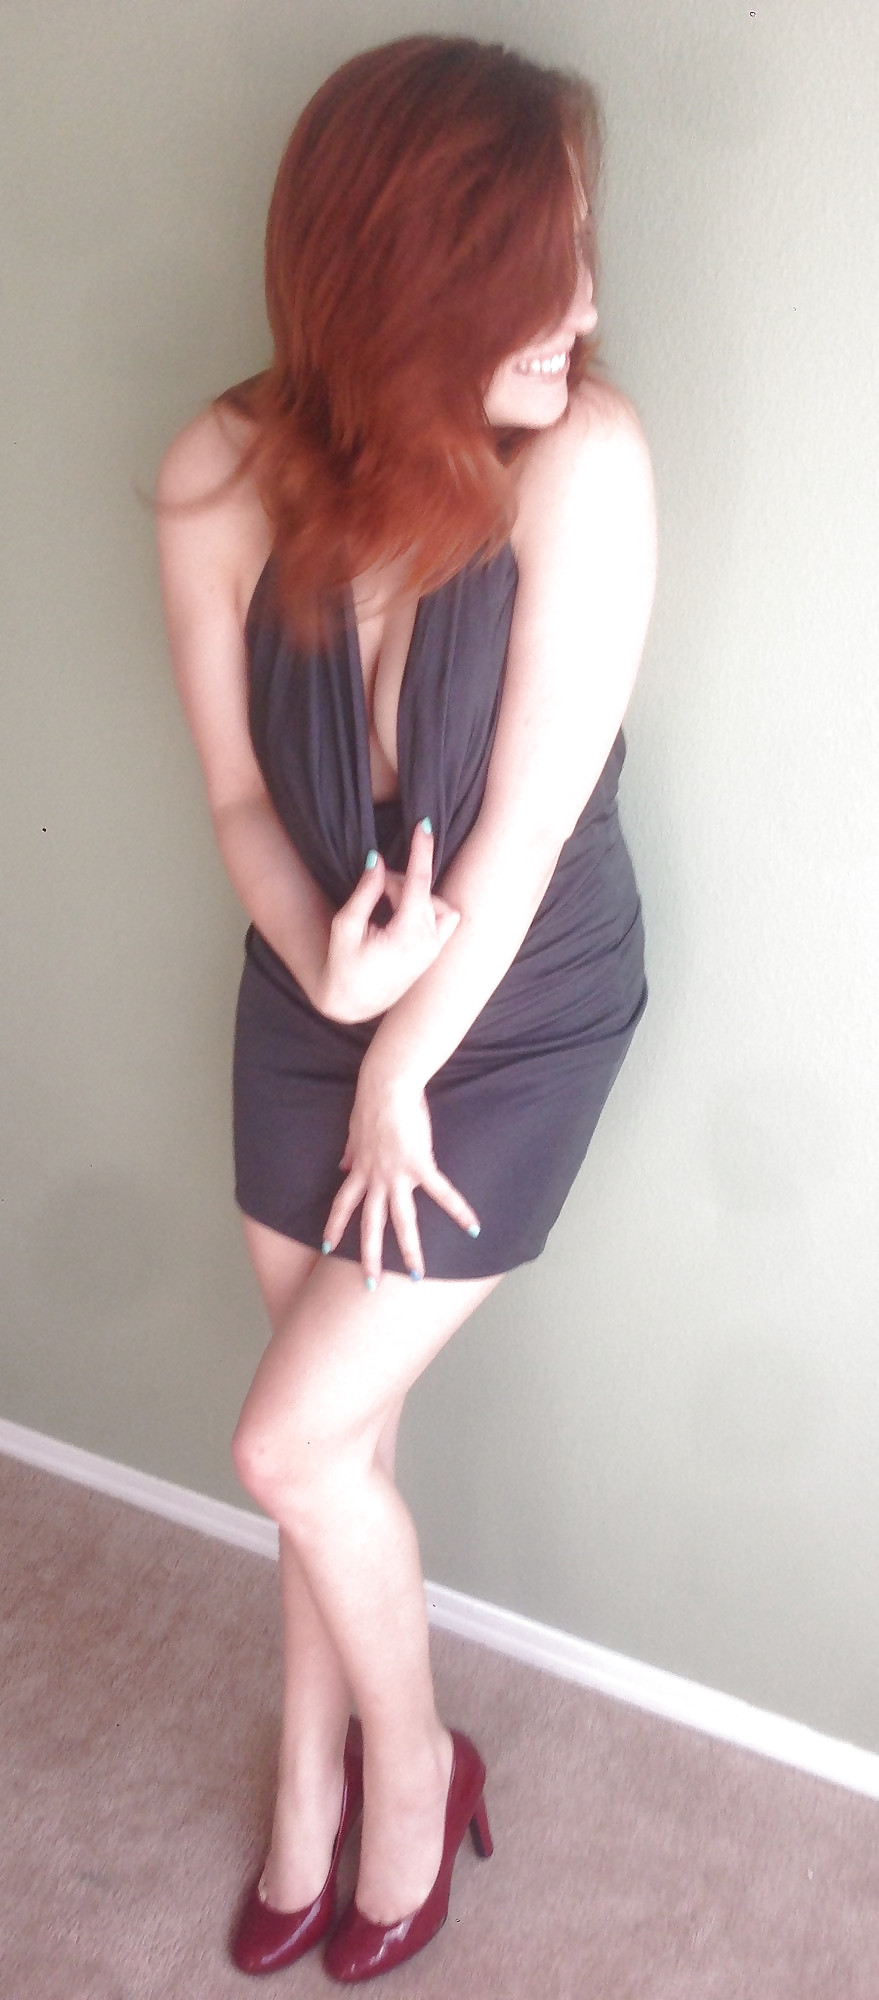 Redhead in dress (and out of it) #19906330